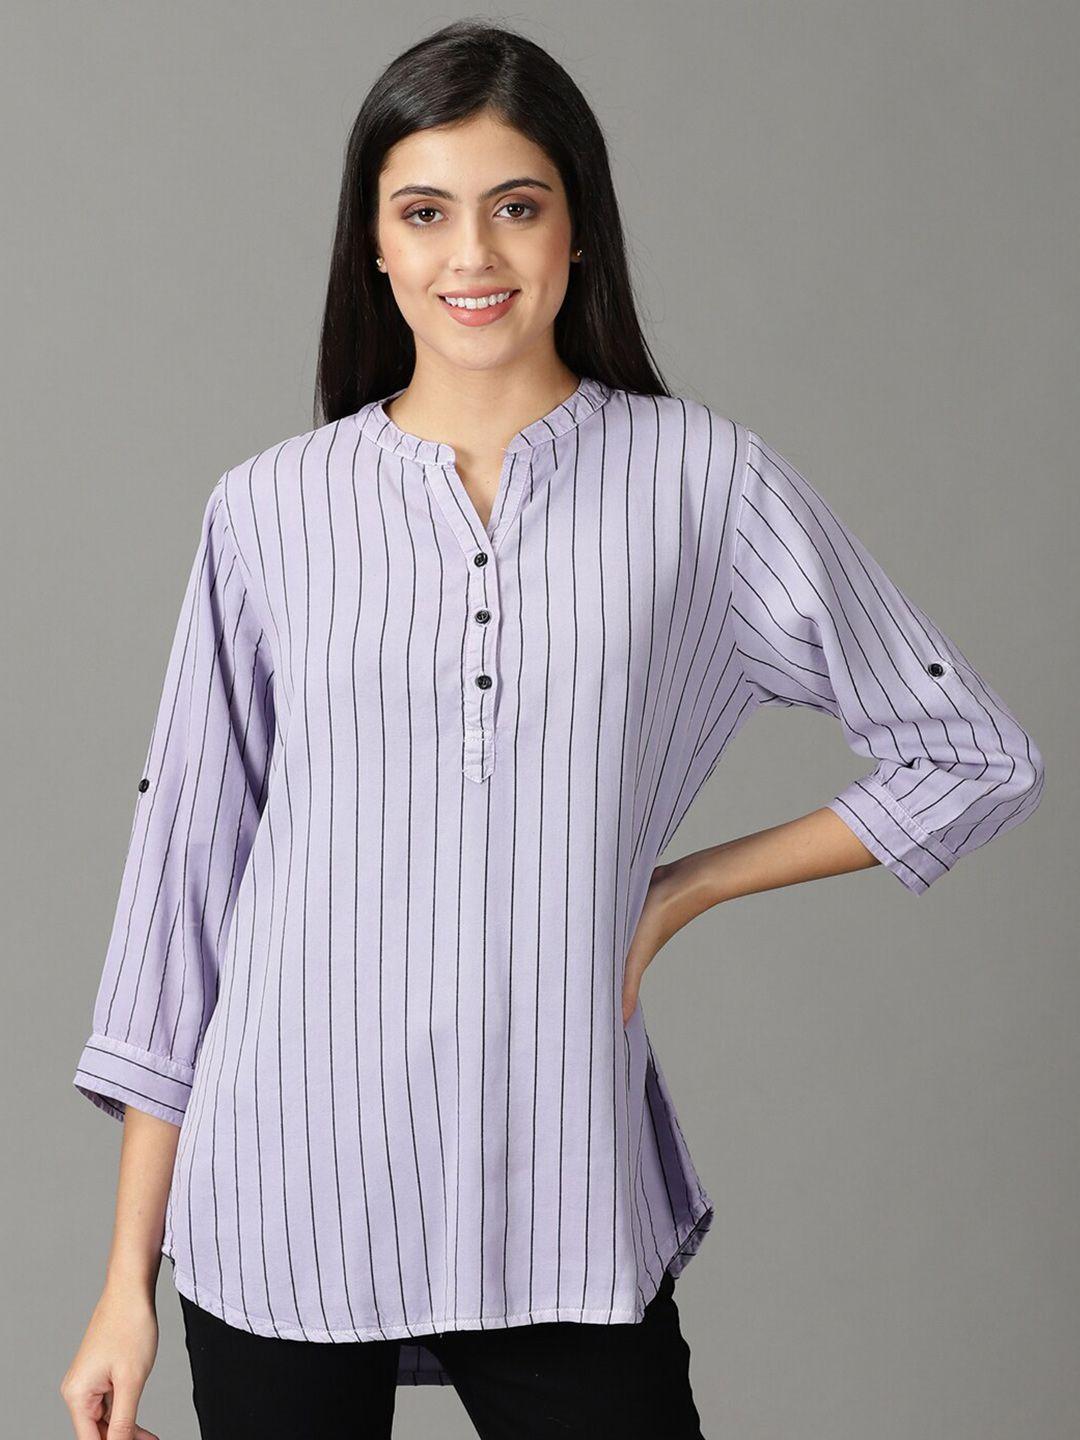 showoff striped mandarin collar roll-up sleeves shirt style top